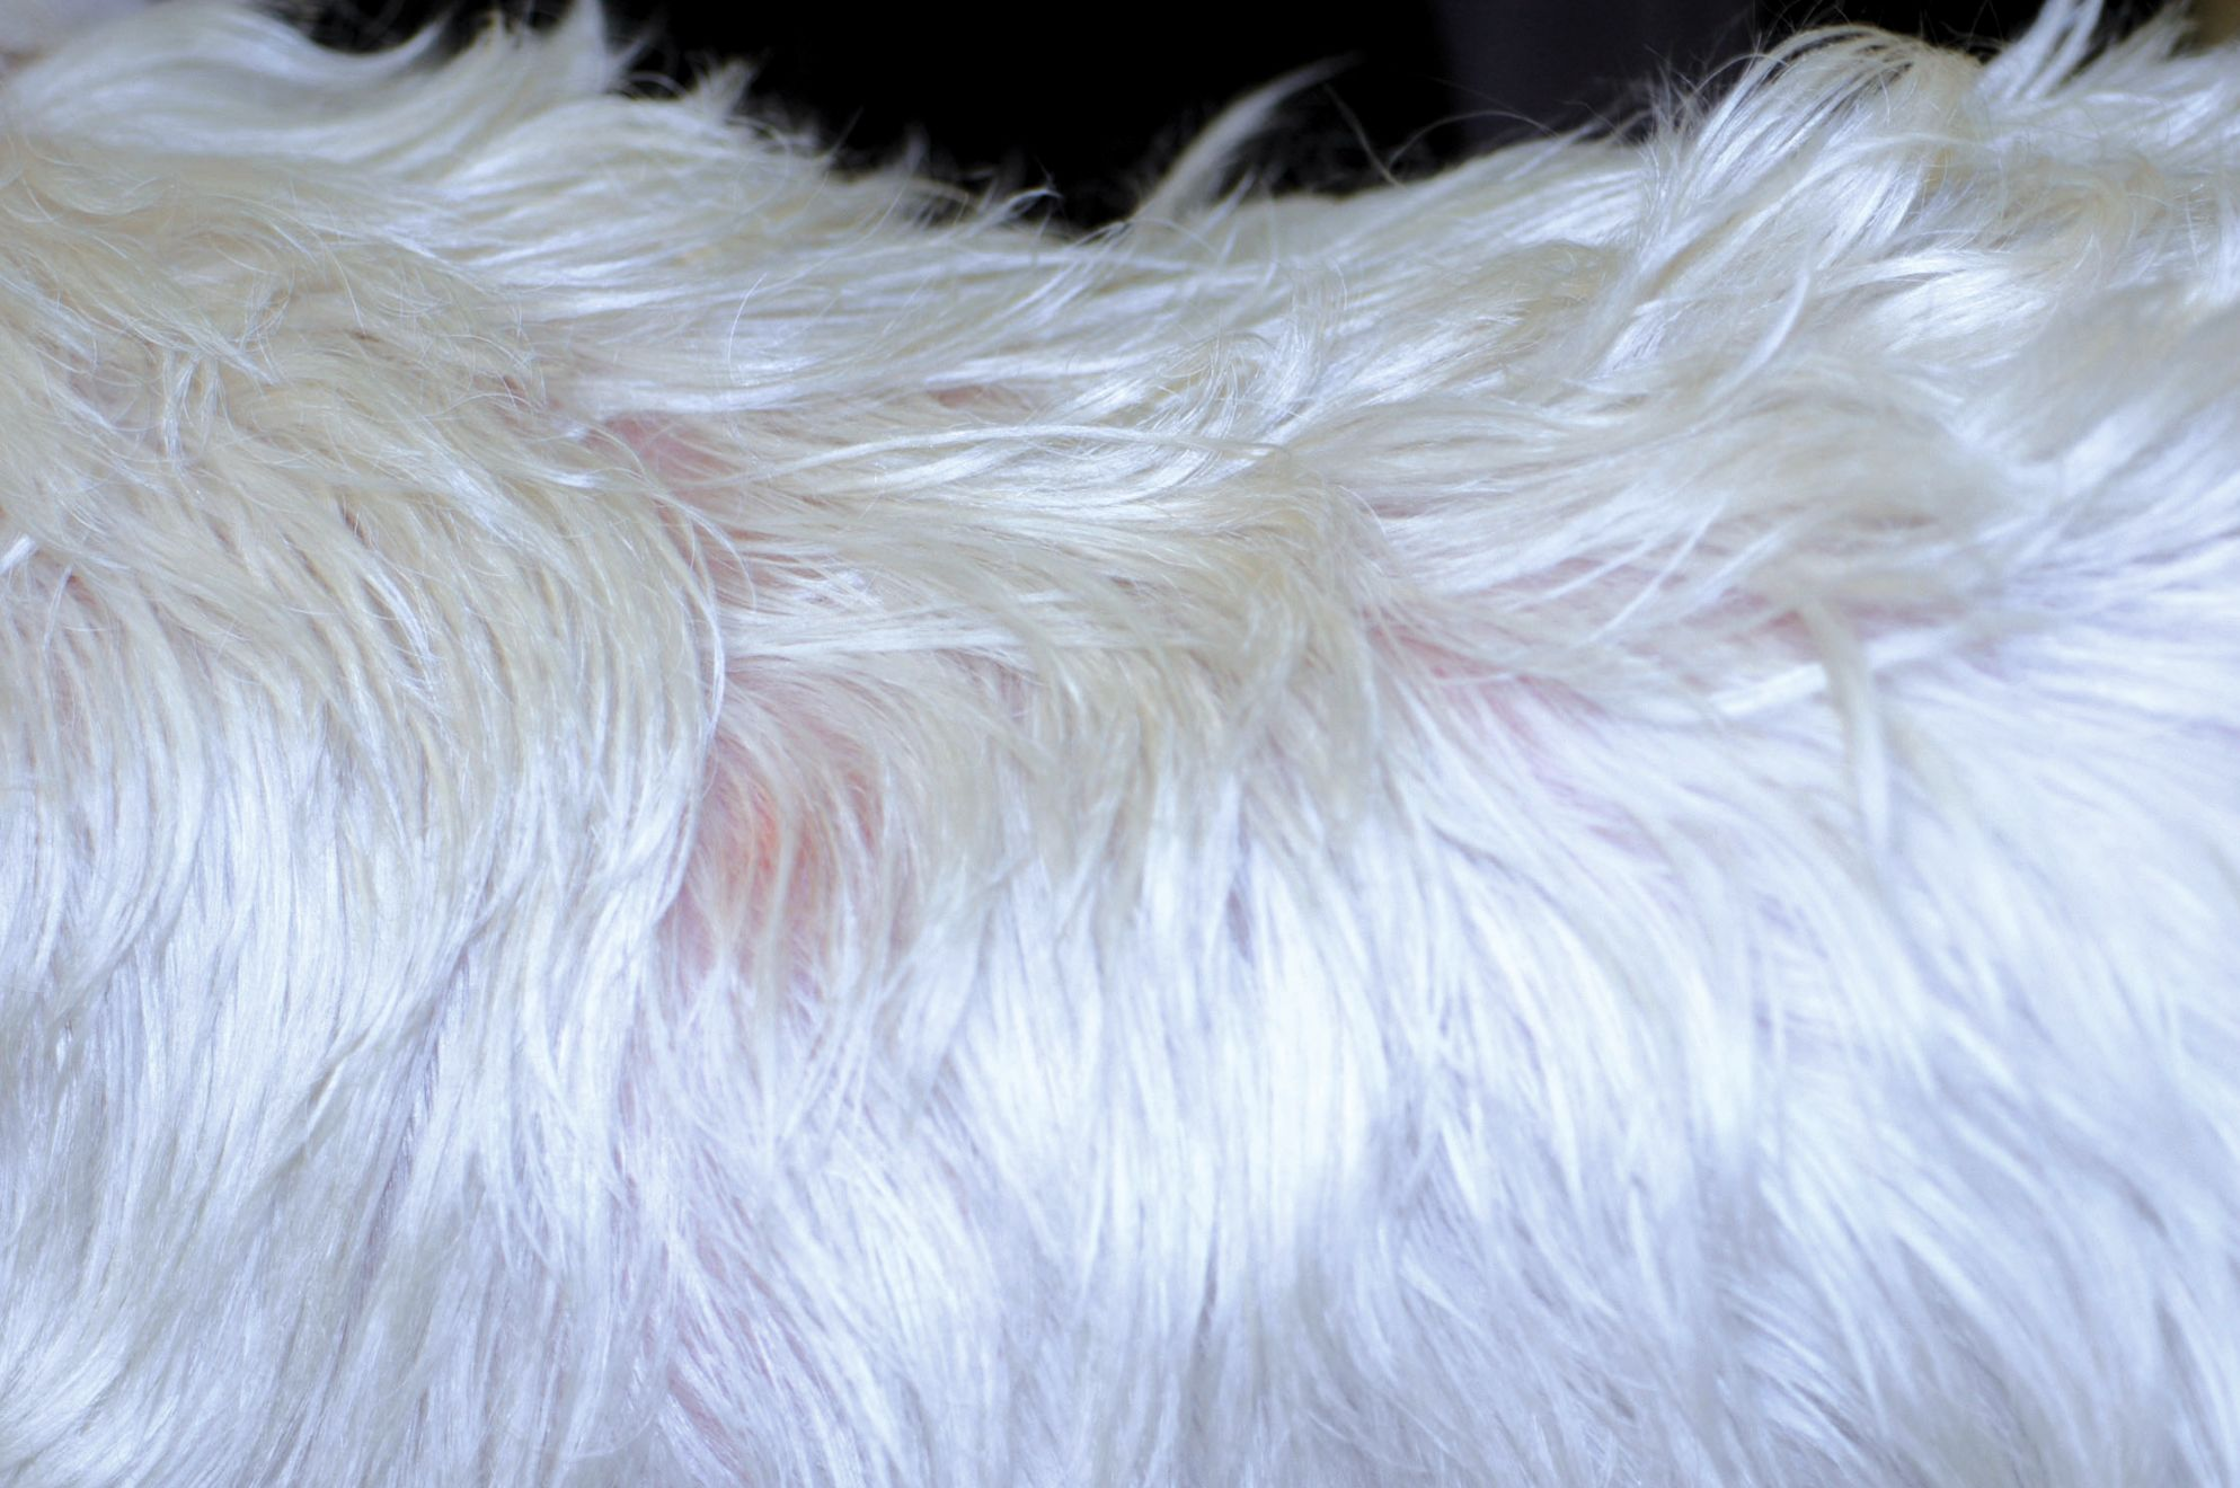 Demodex injai commonly presents in middle-age terriers as a greasy skin condition.